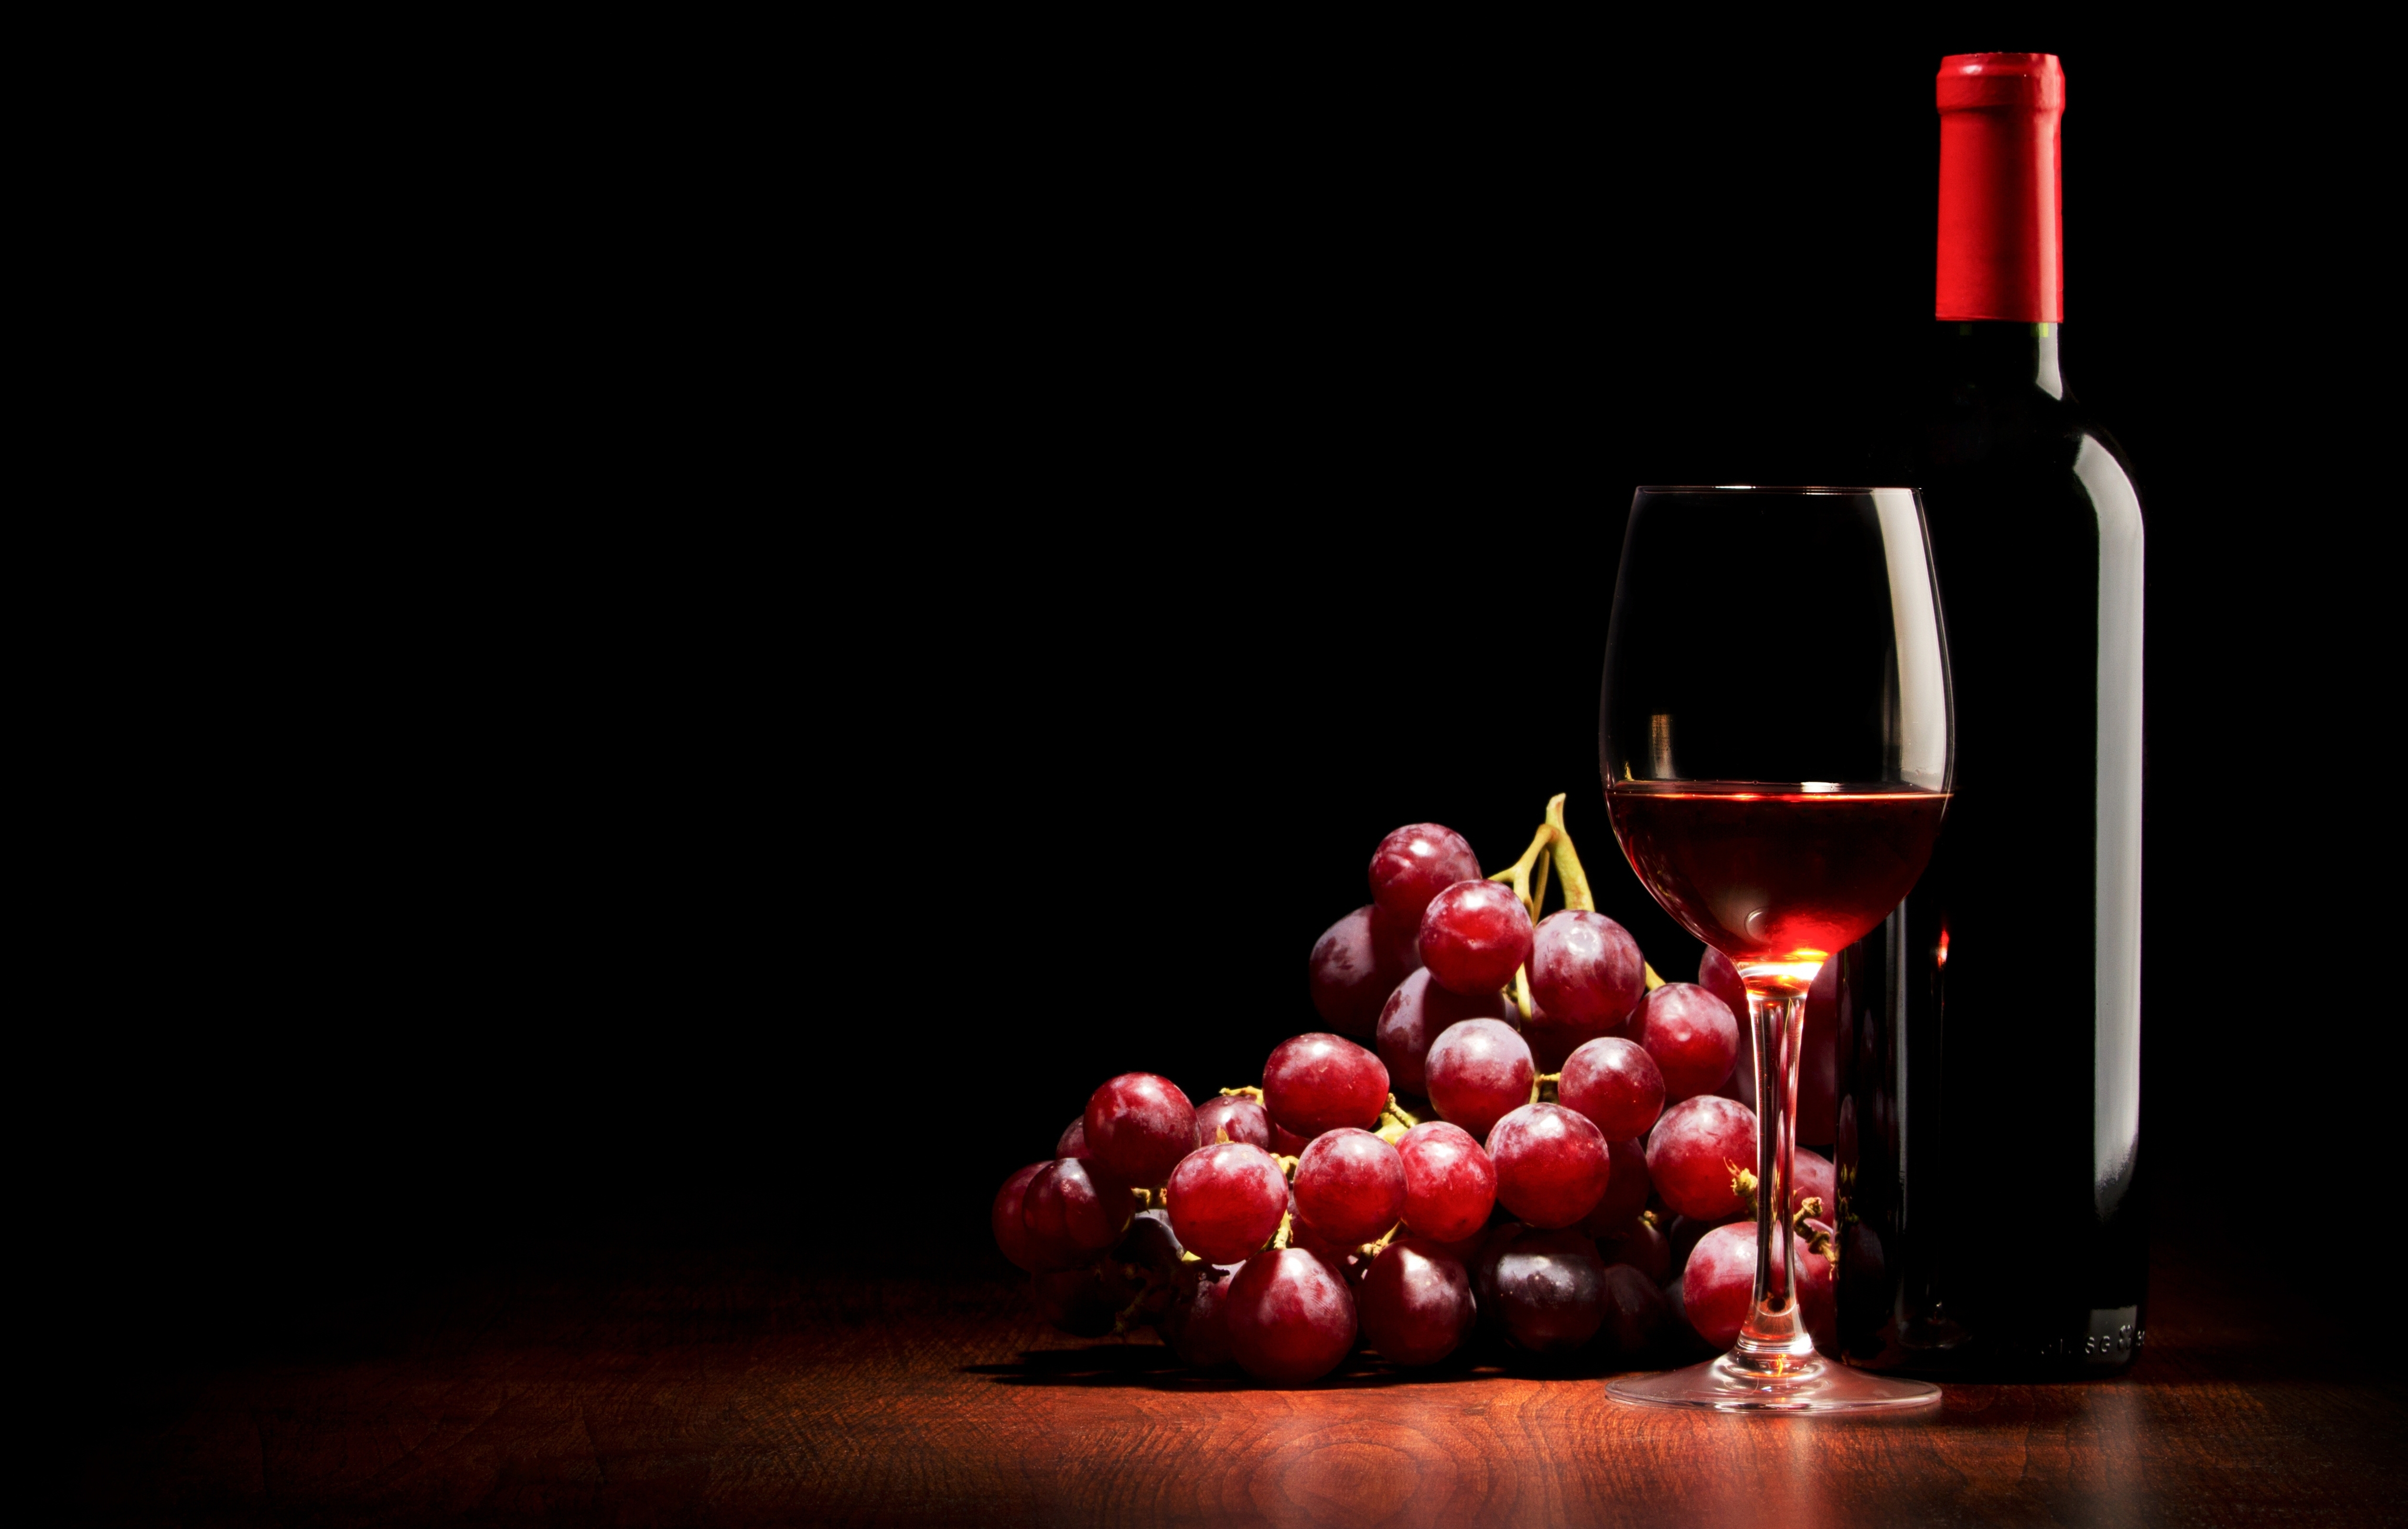 Wine red grapes bottle glass black background wallpaper 5040x3200